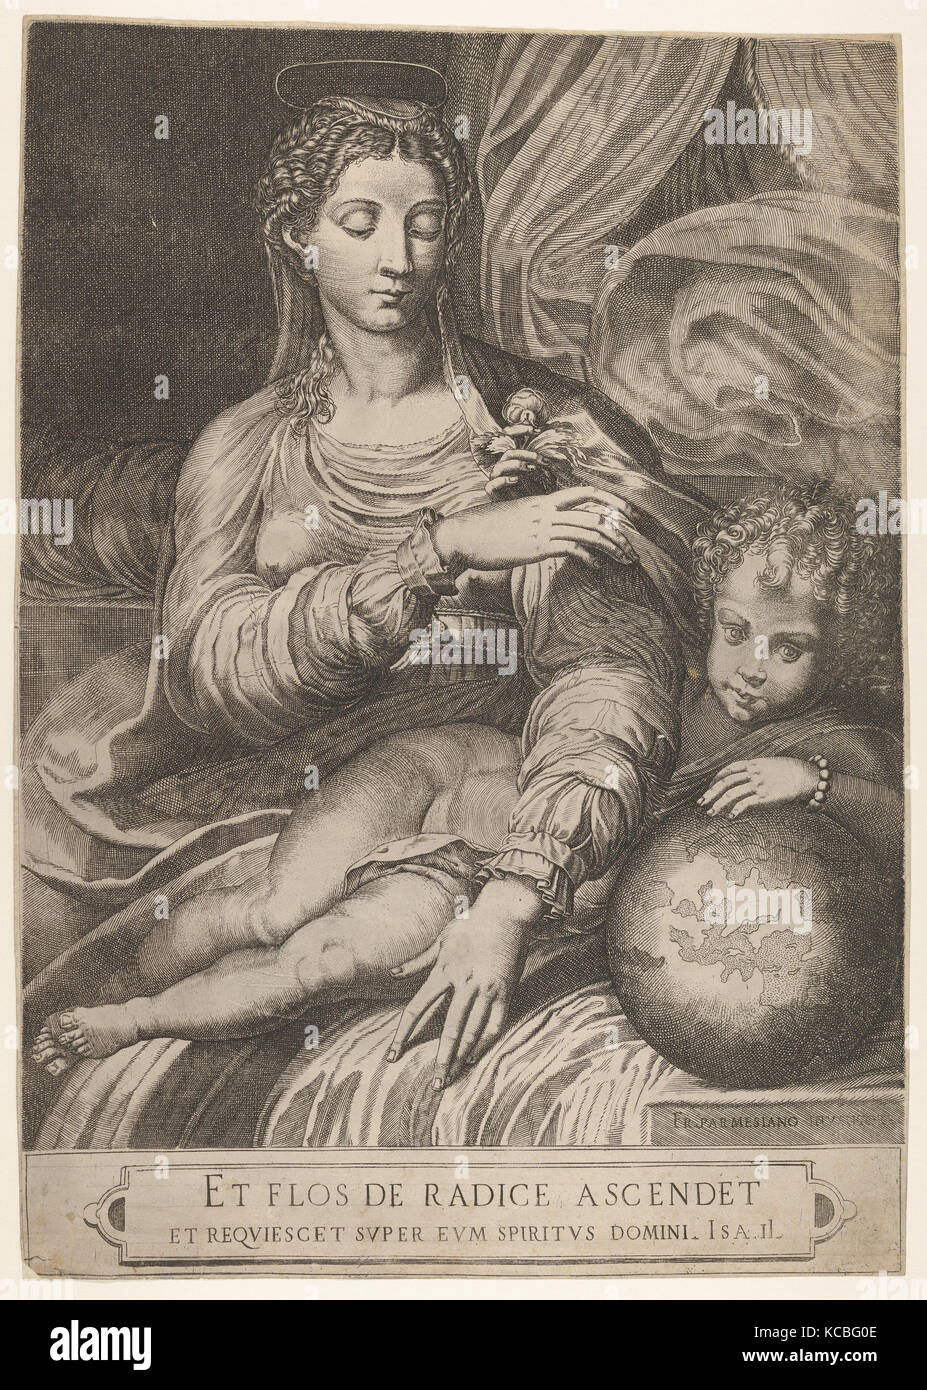 Madonna of the Rose, the Madonna reaches for a rose upheld by the child, who reclines on a drapery and rests his left arm Stock Photo